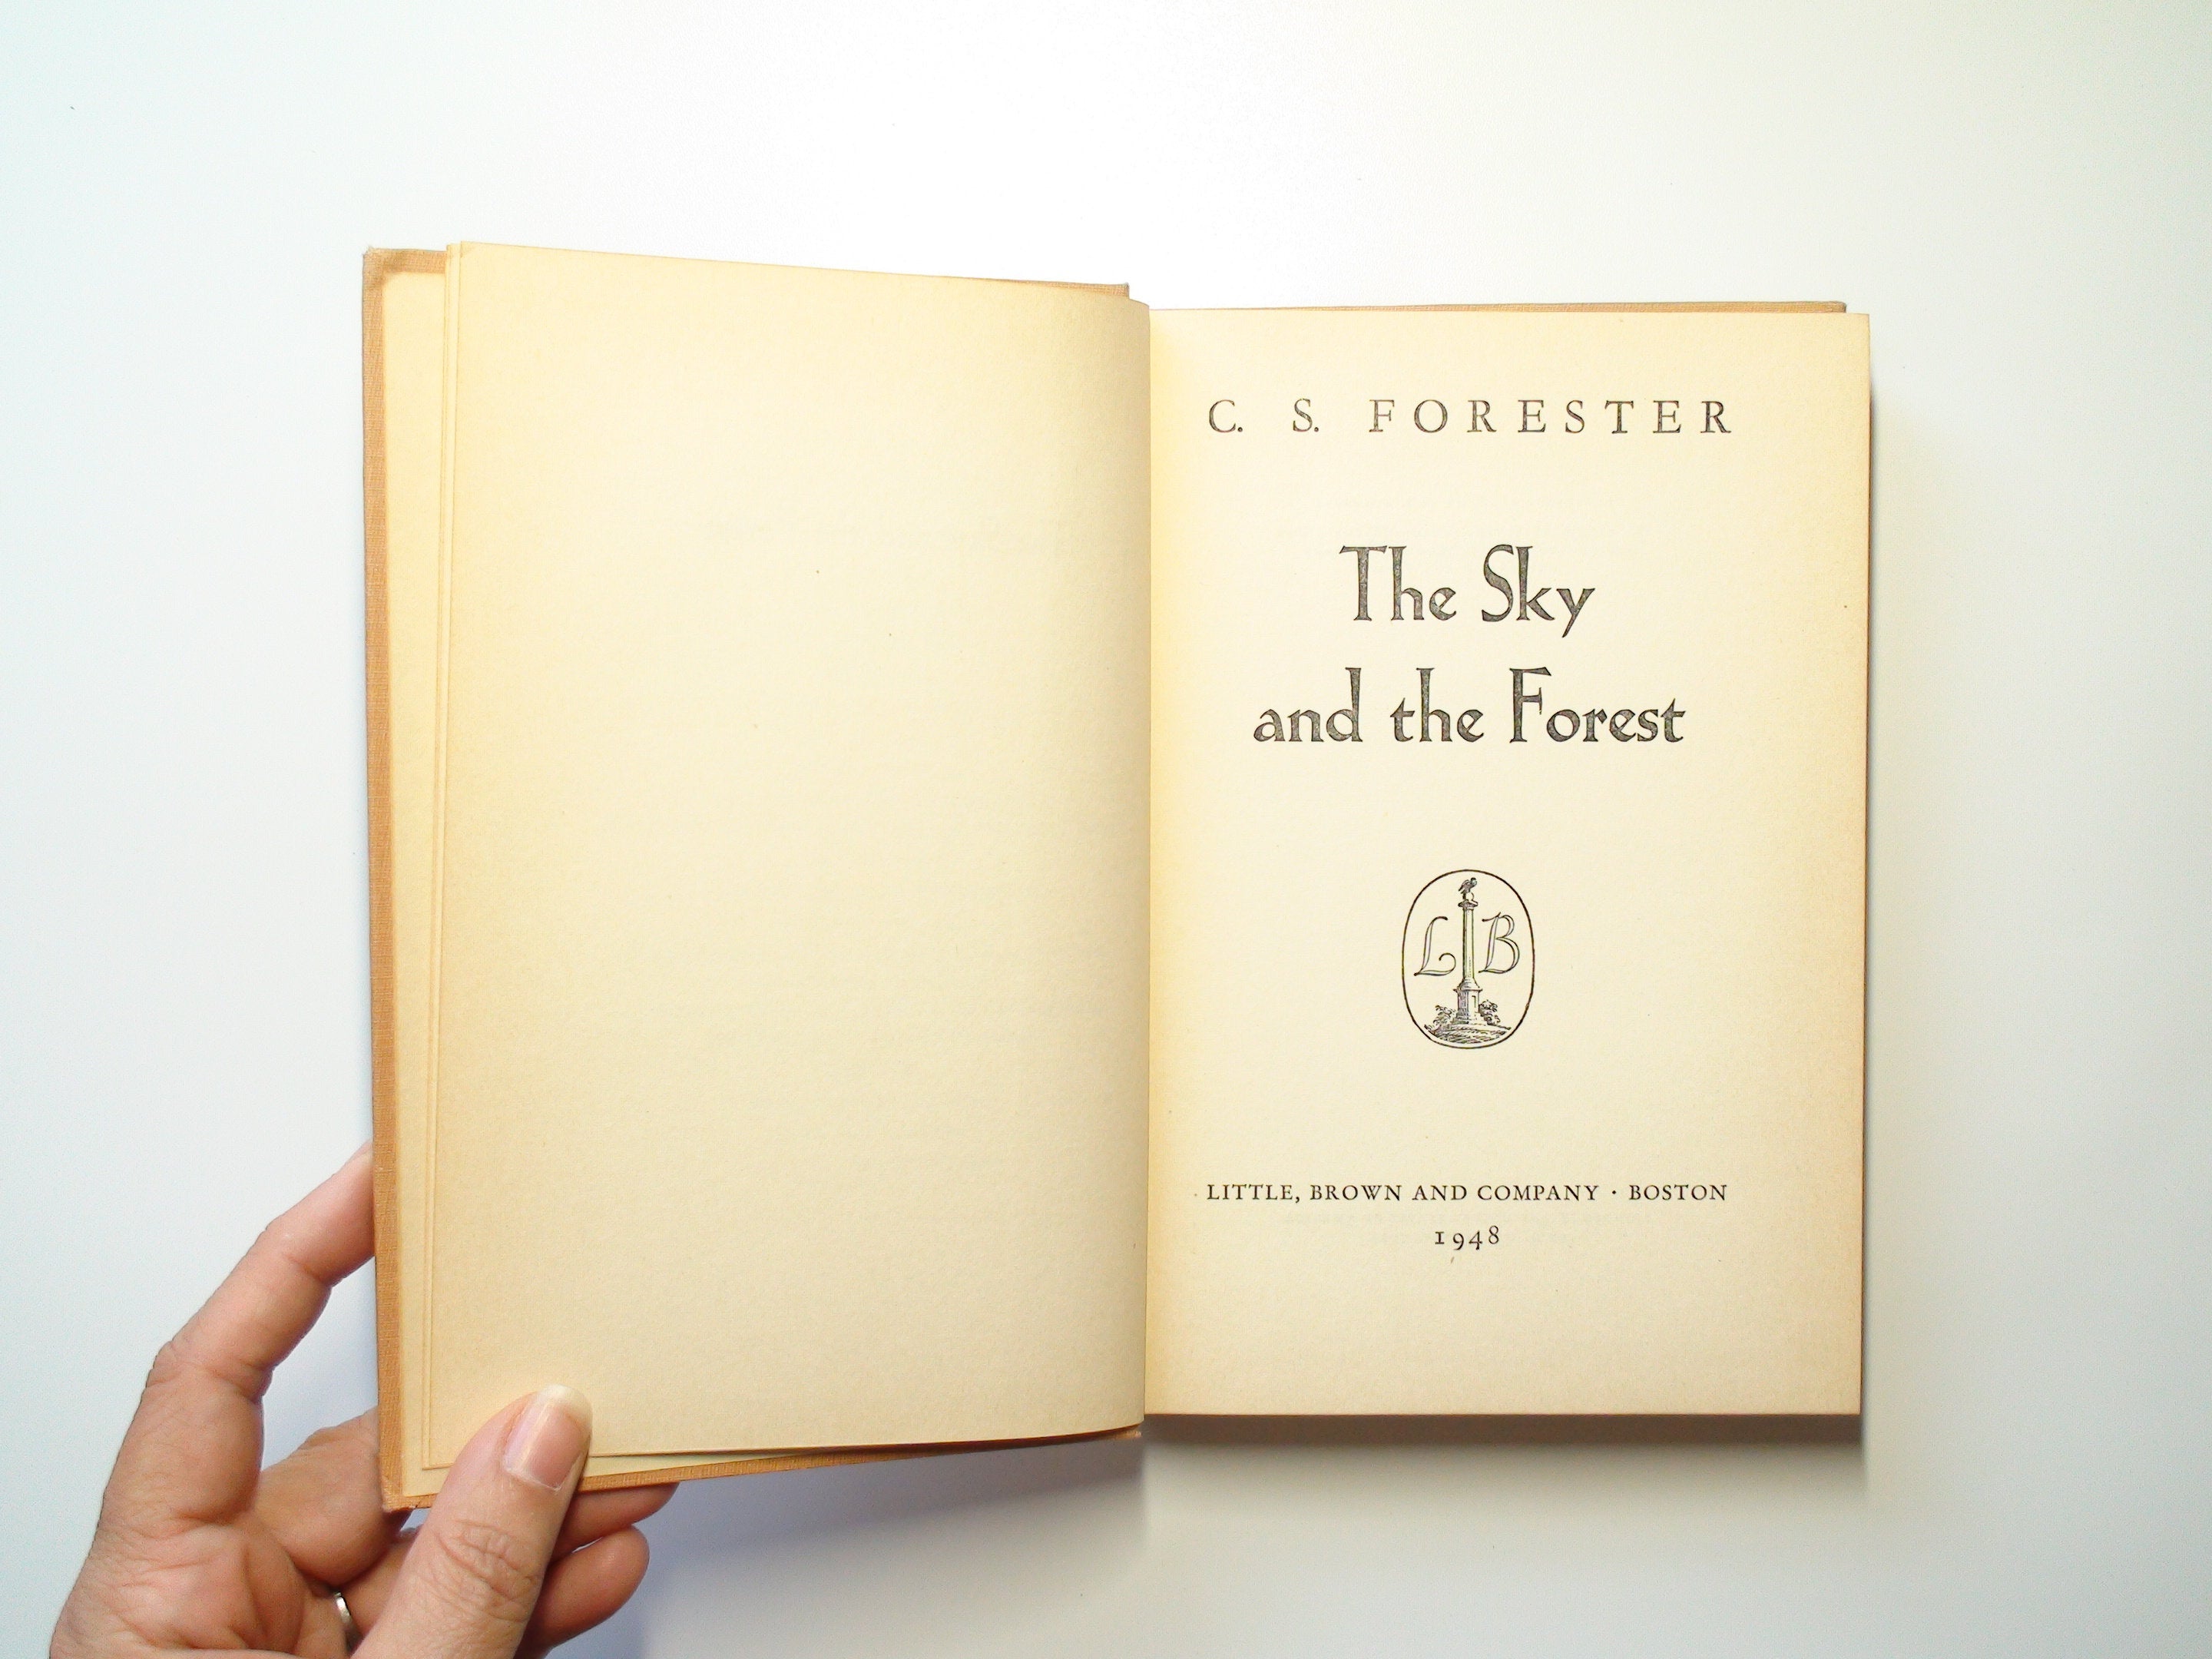 The Sky and the Forest, C. S. Forester, 1st Ed, no DJ, Book Club, 1948